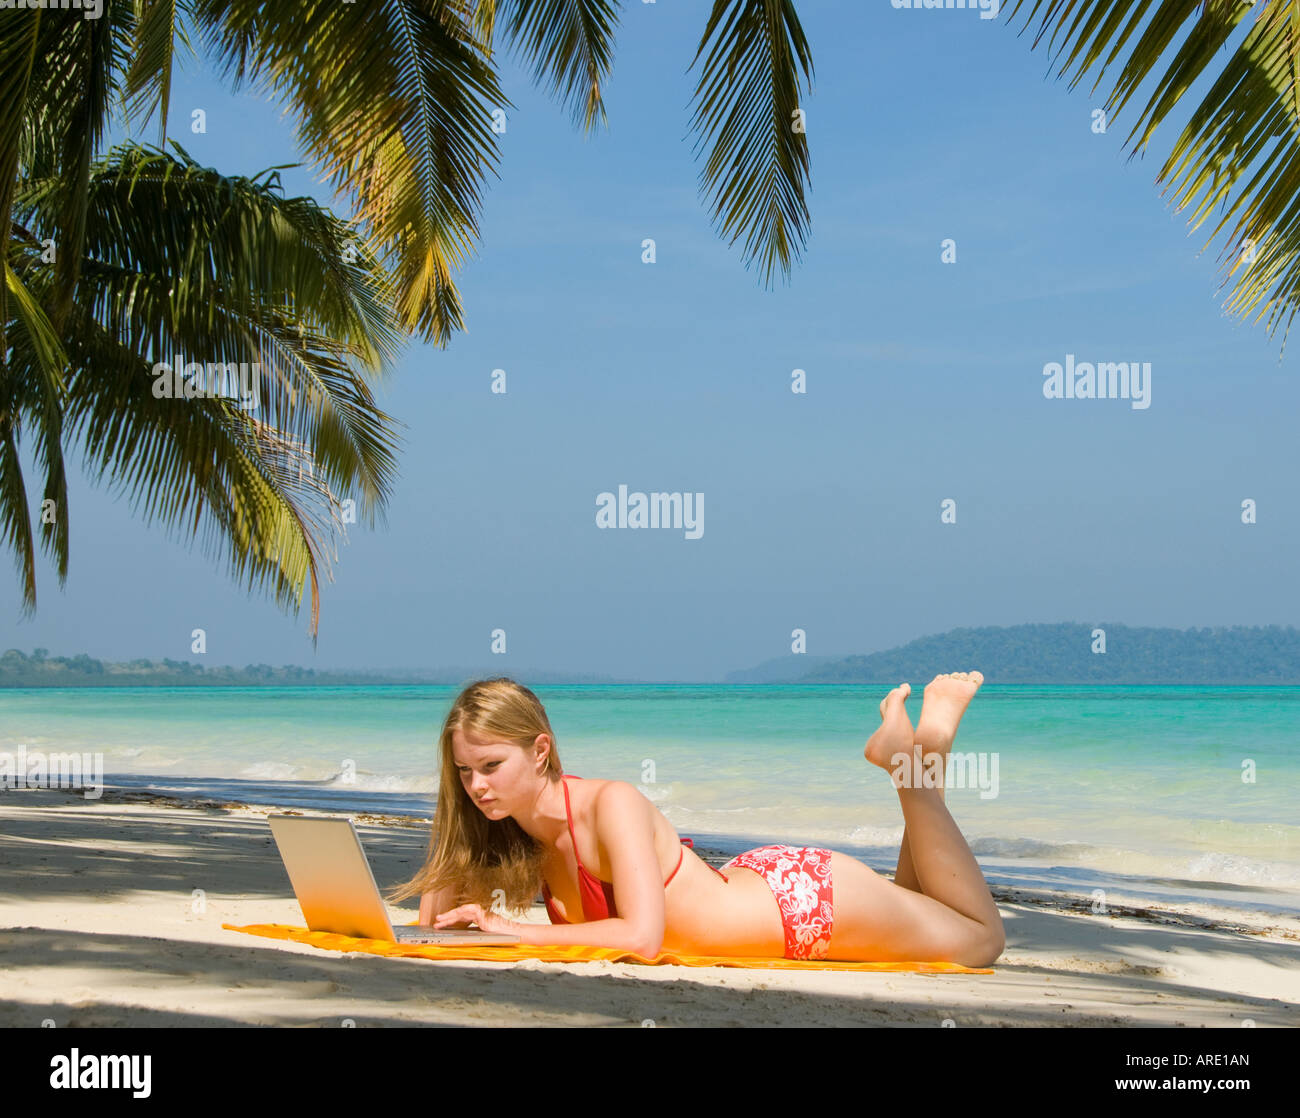 A woman on a beach with a laptop computer Stock Photo